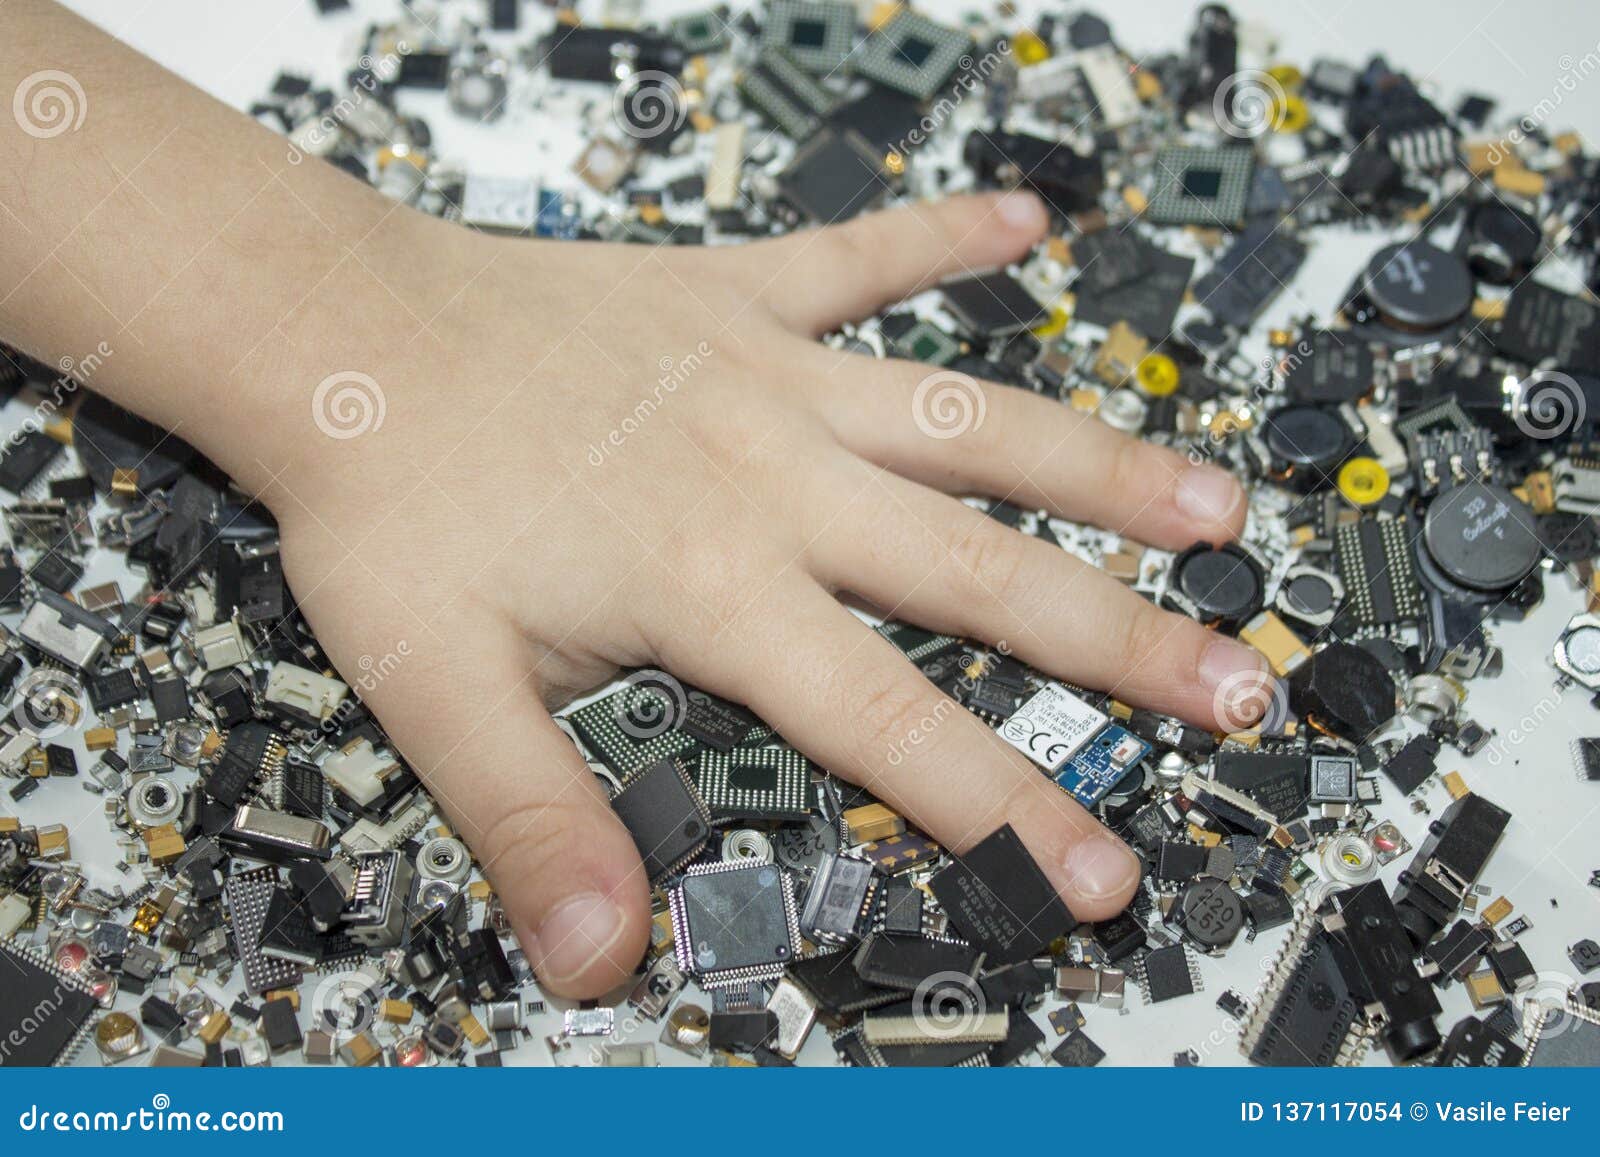 smt components and a child hand in them.